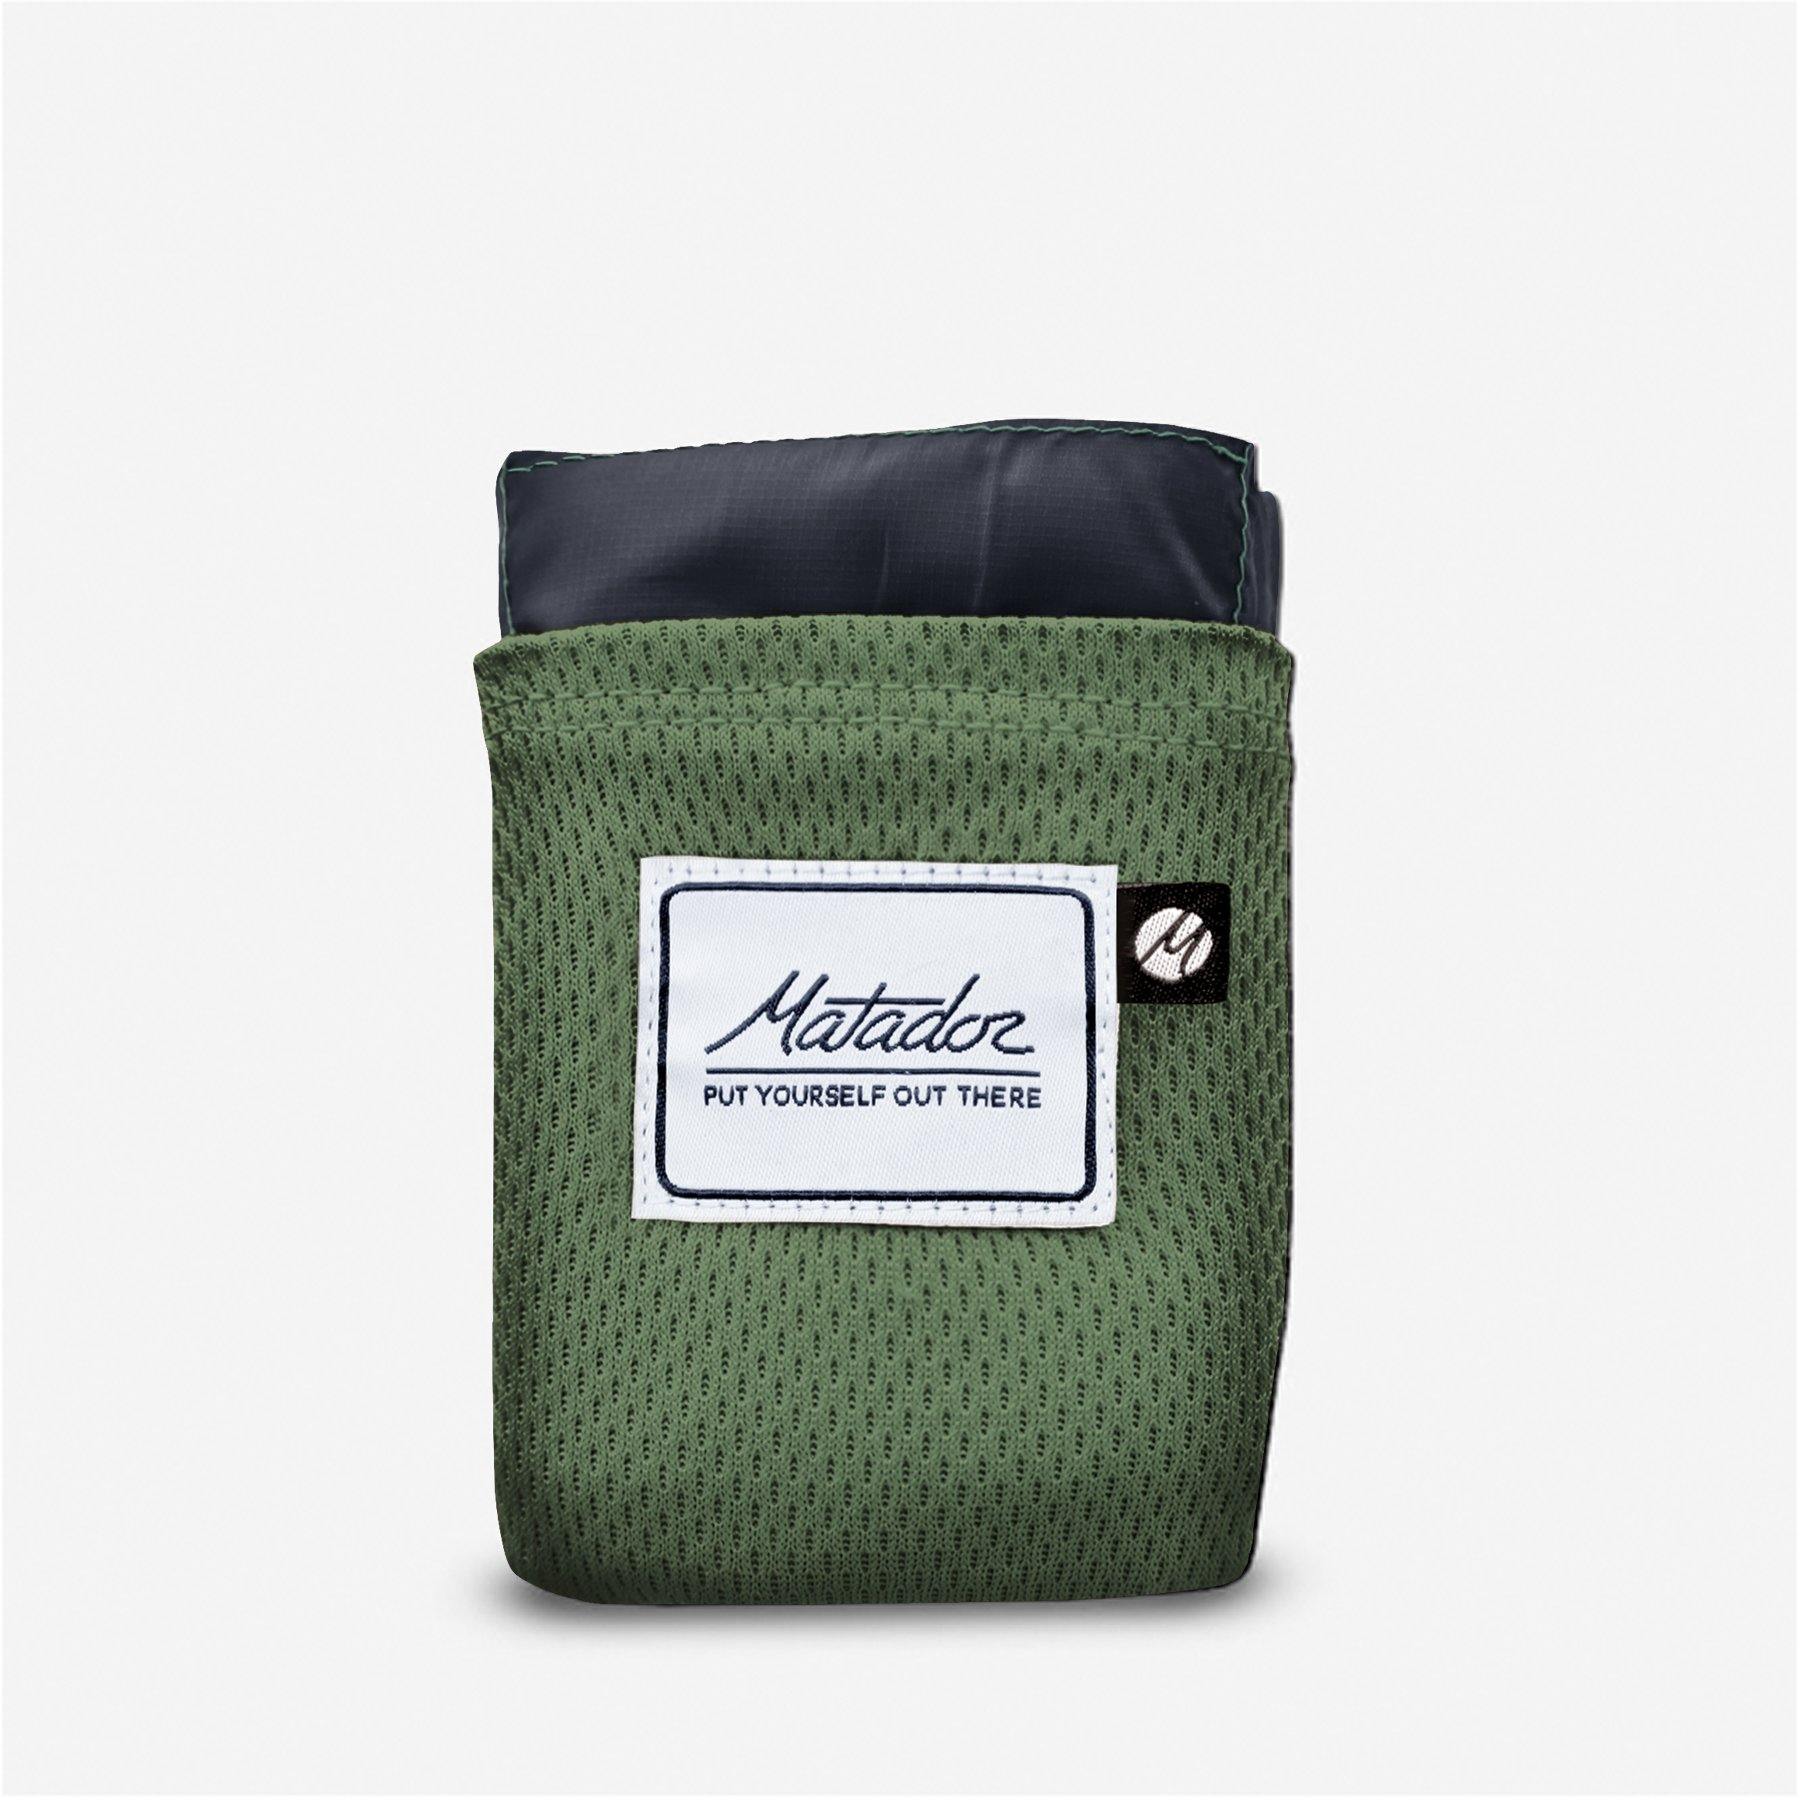 Small packable pocket blanket ground cover in green